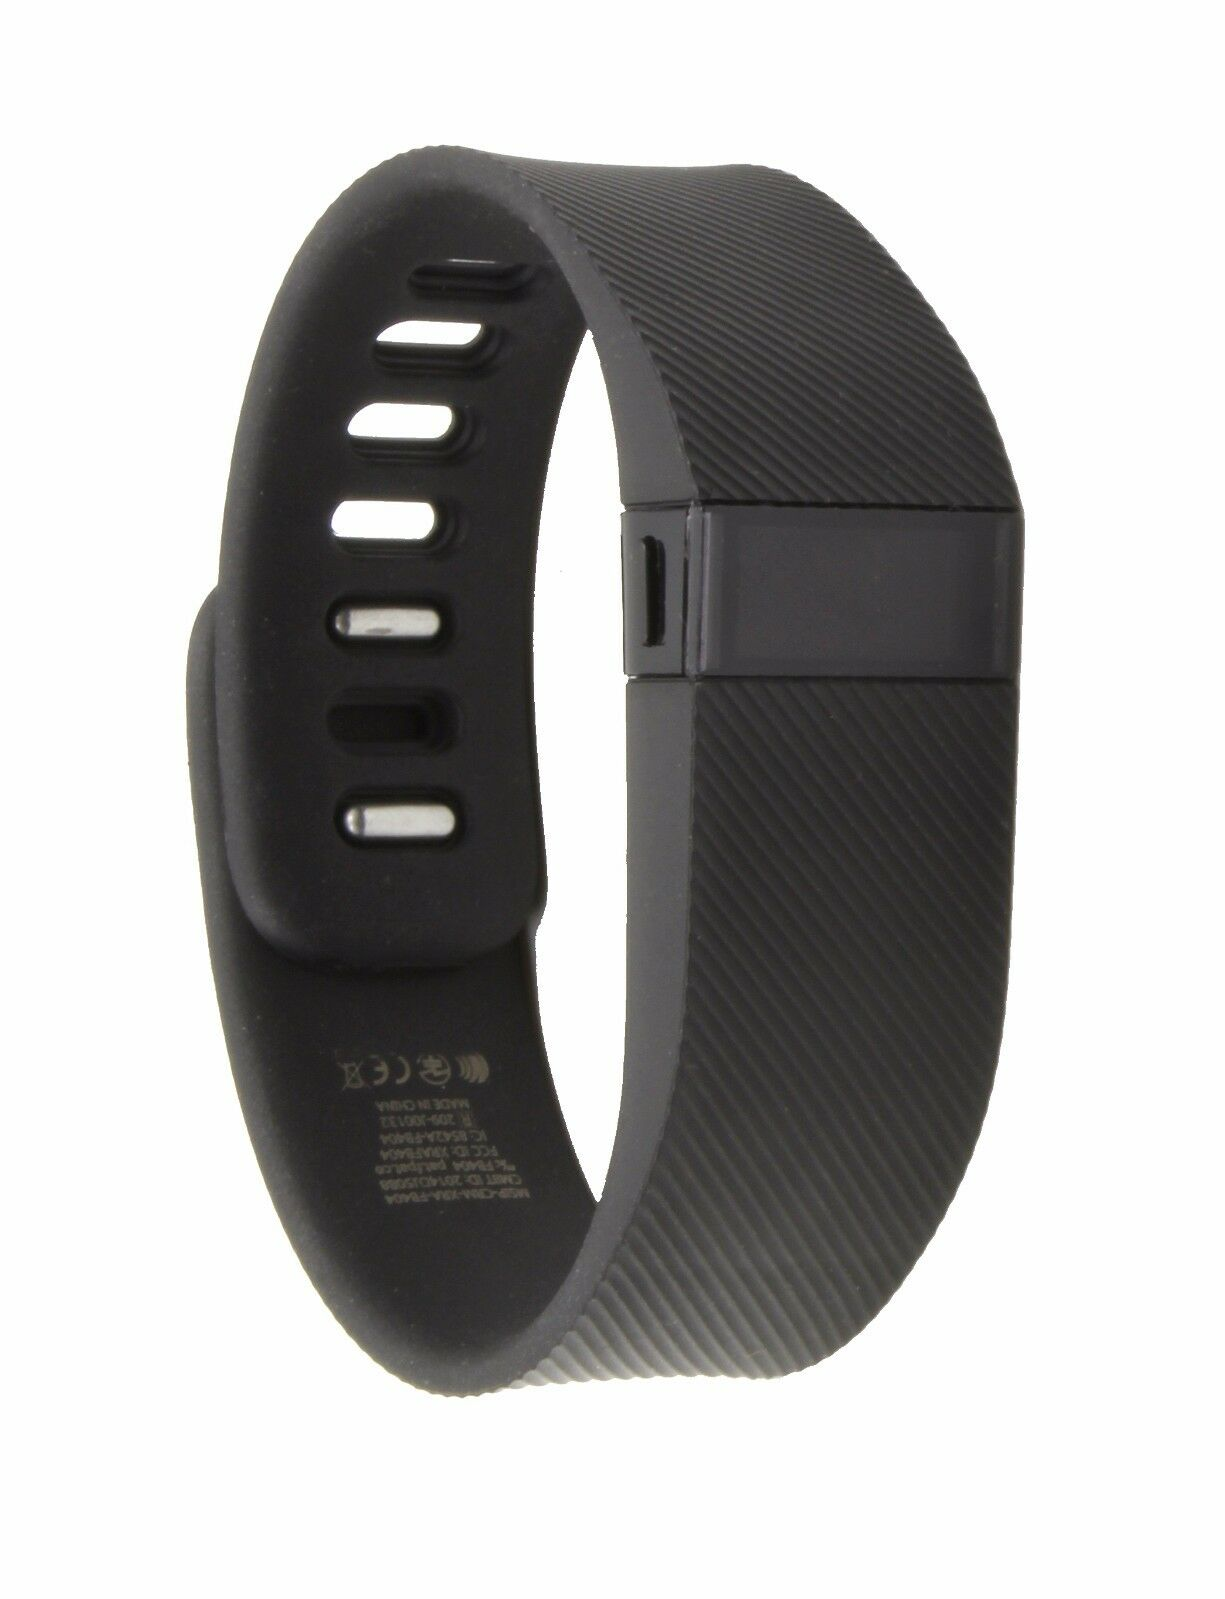 fitbit charge 2 bands kmart